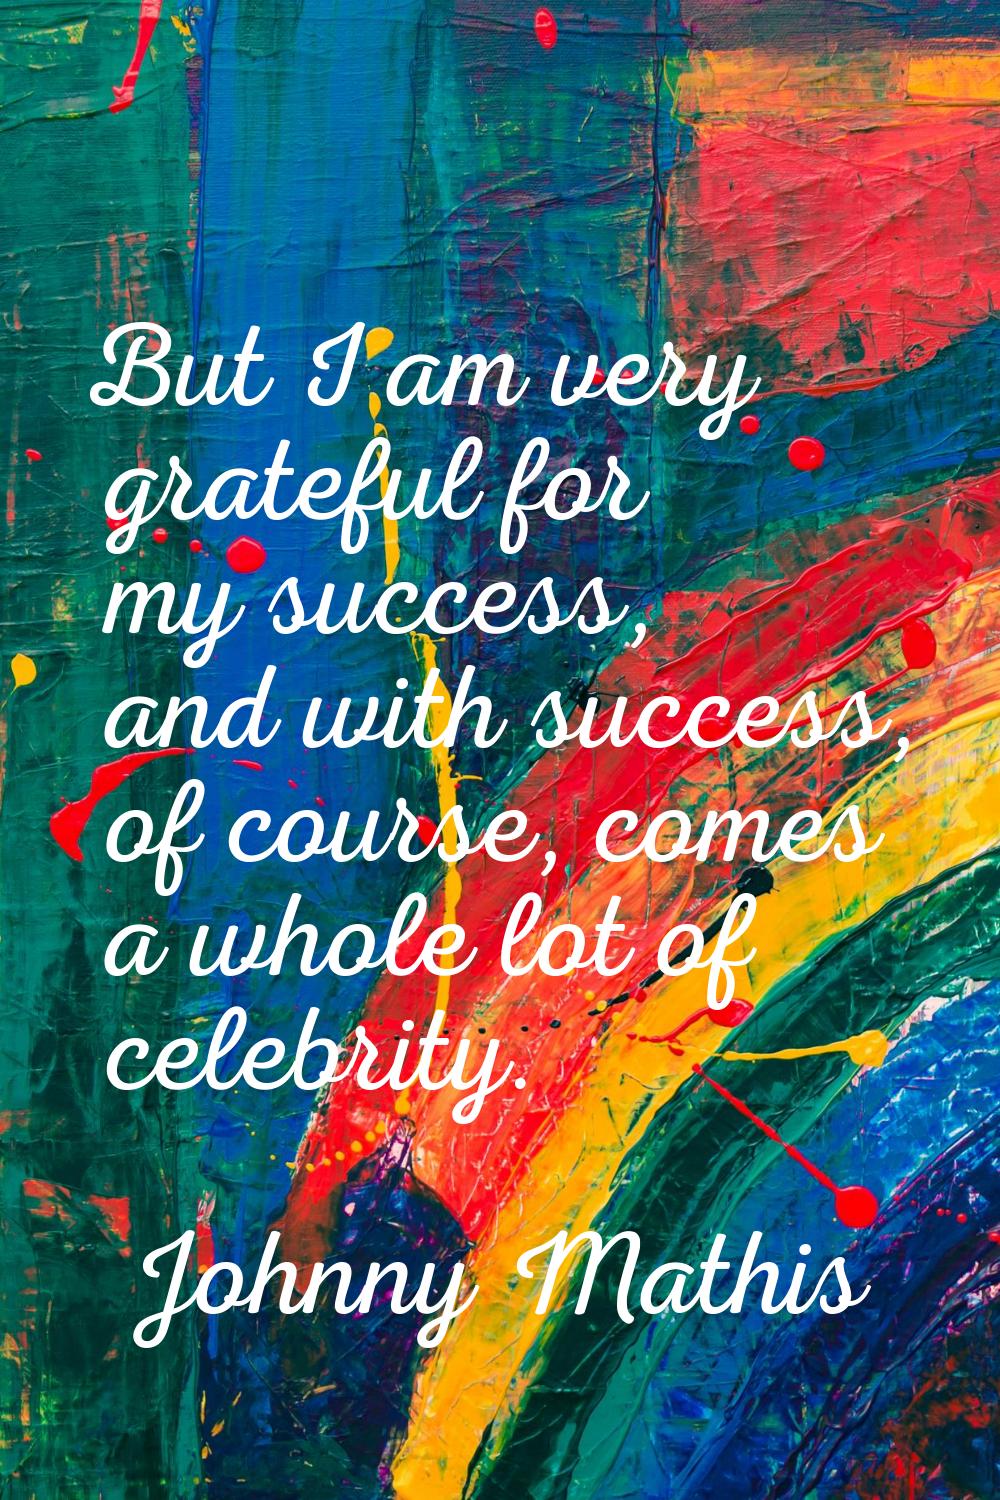 But I am very grateful for my success, and with success, of course, comes a whole lot of celebrity.